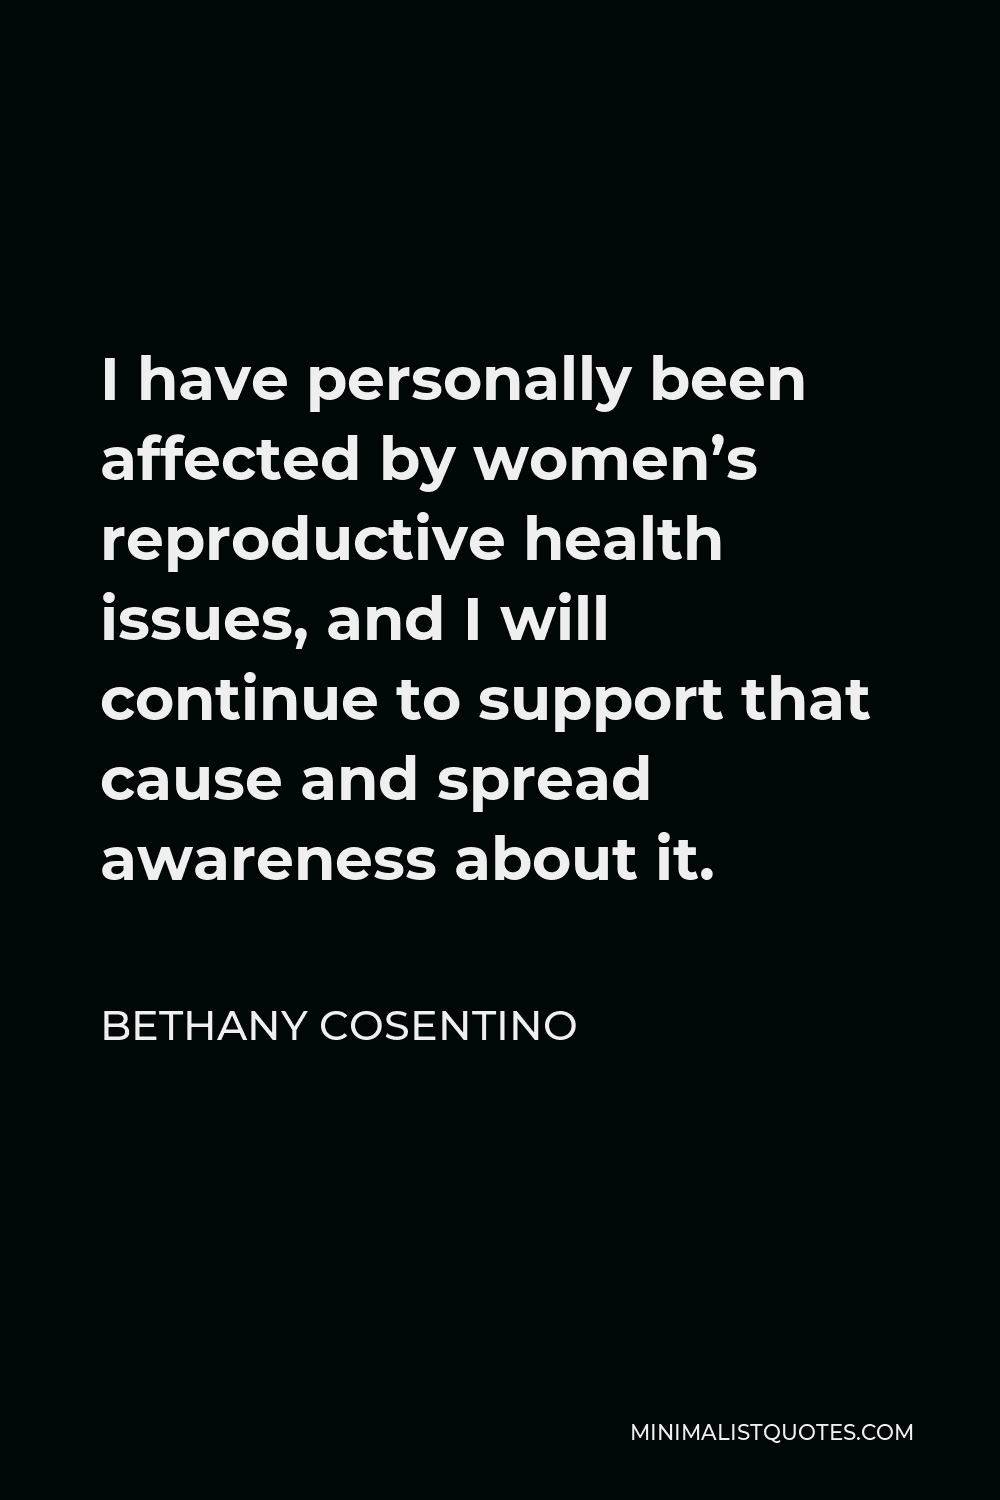 Bethany Cosentino Quote - I have personally been affected by women’s reproductive health issues, and I will continue to support that cause and spread awareness about it.